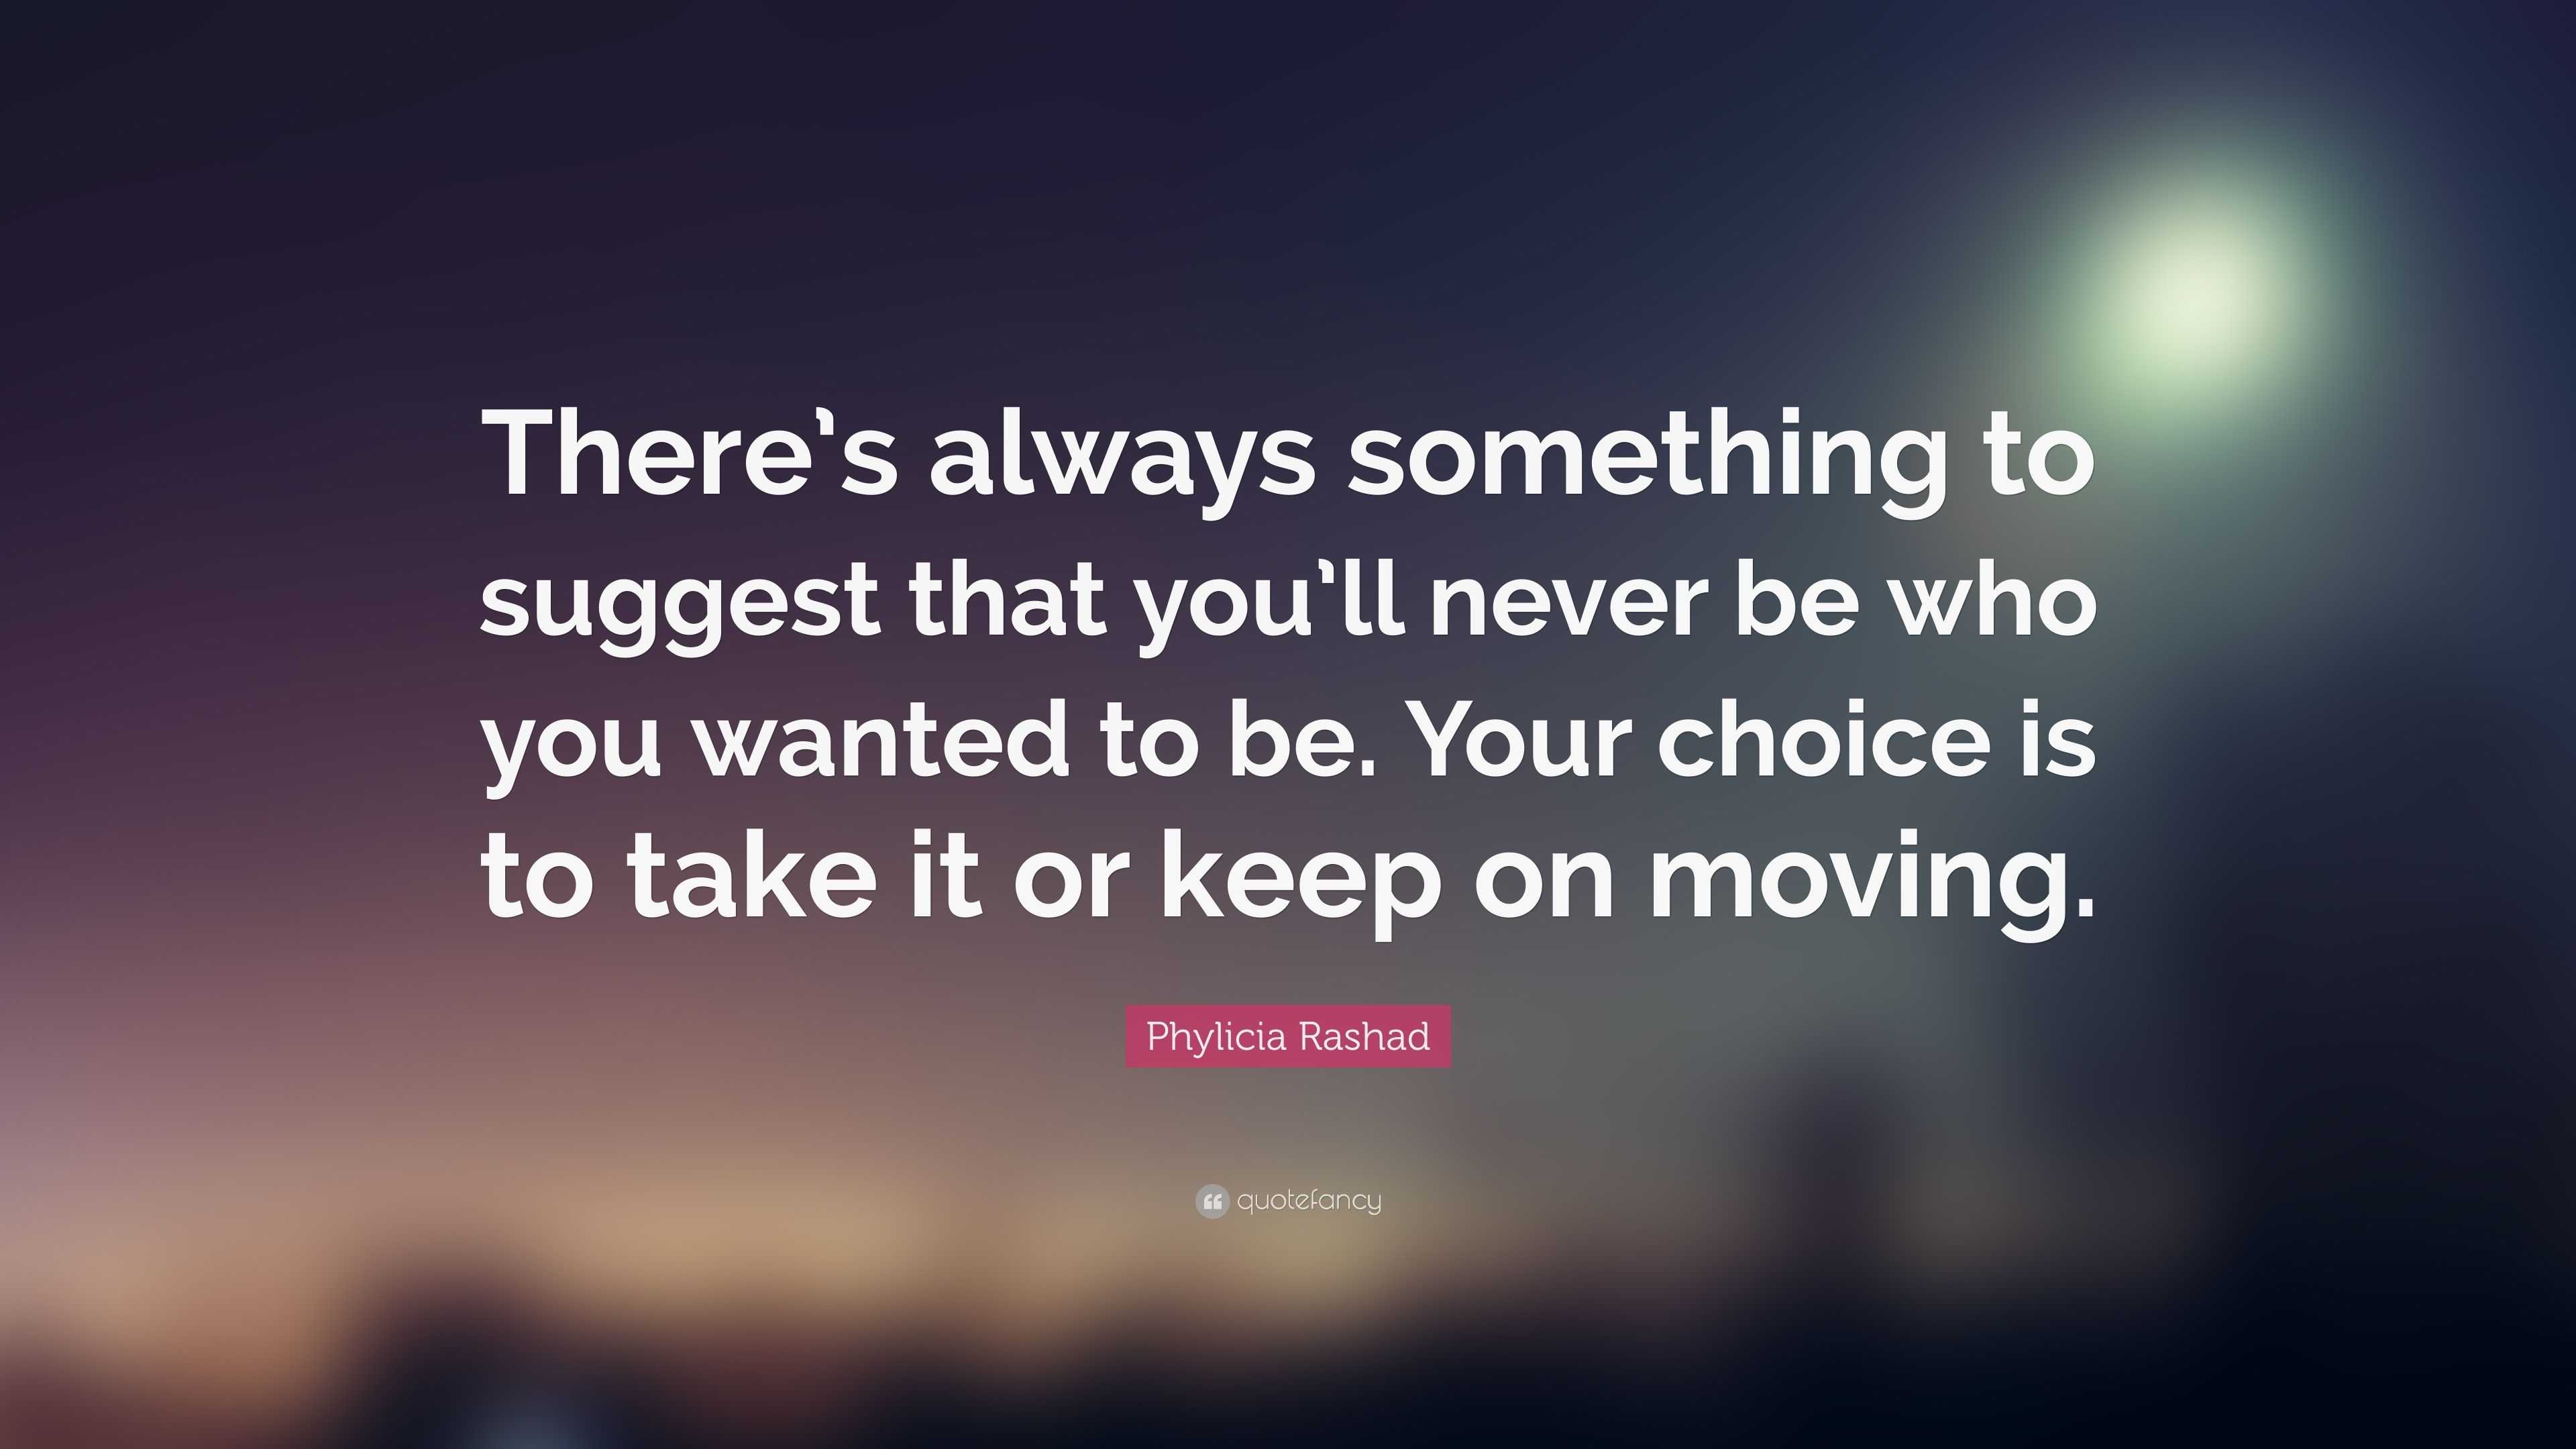 Phylicia Rashad Quote: “There’s always something to suggest that you’ll ...